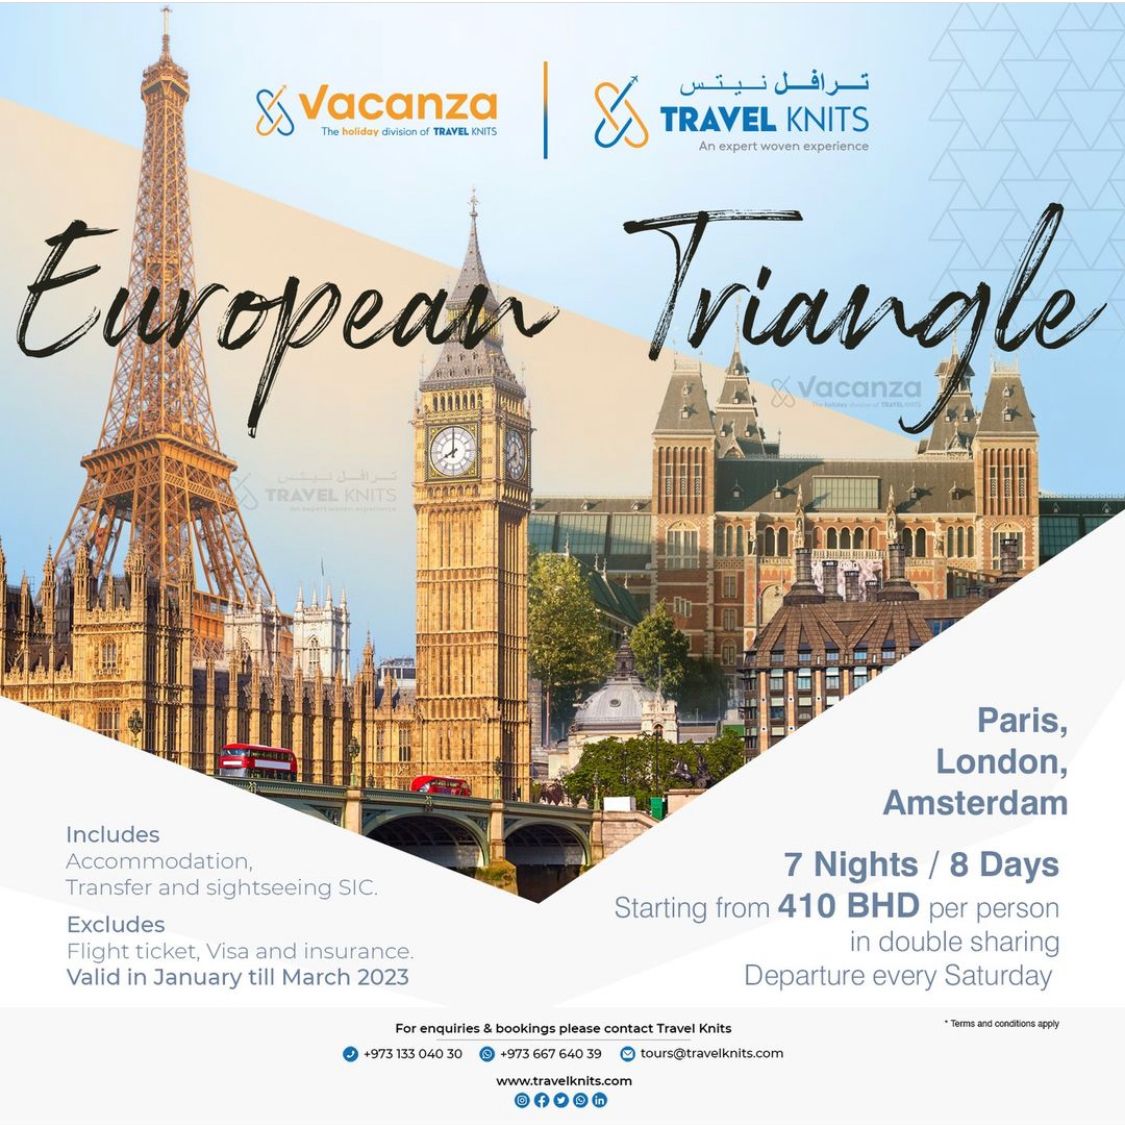 European Triangle|NetherlandsTour Packages - Book honeymoon ,family,adventure tour packages to Netherlands|Travel Knits												